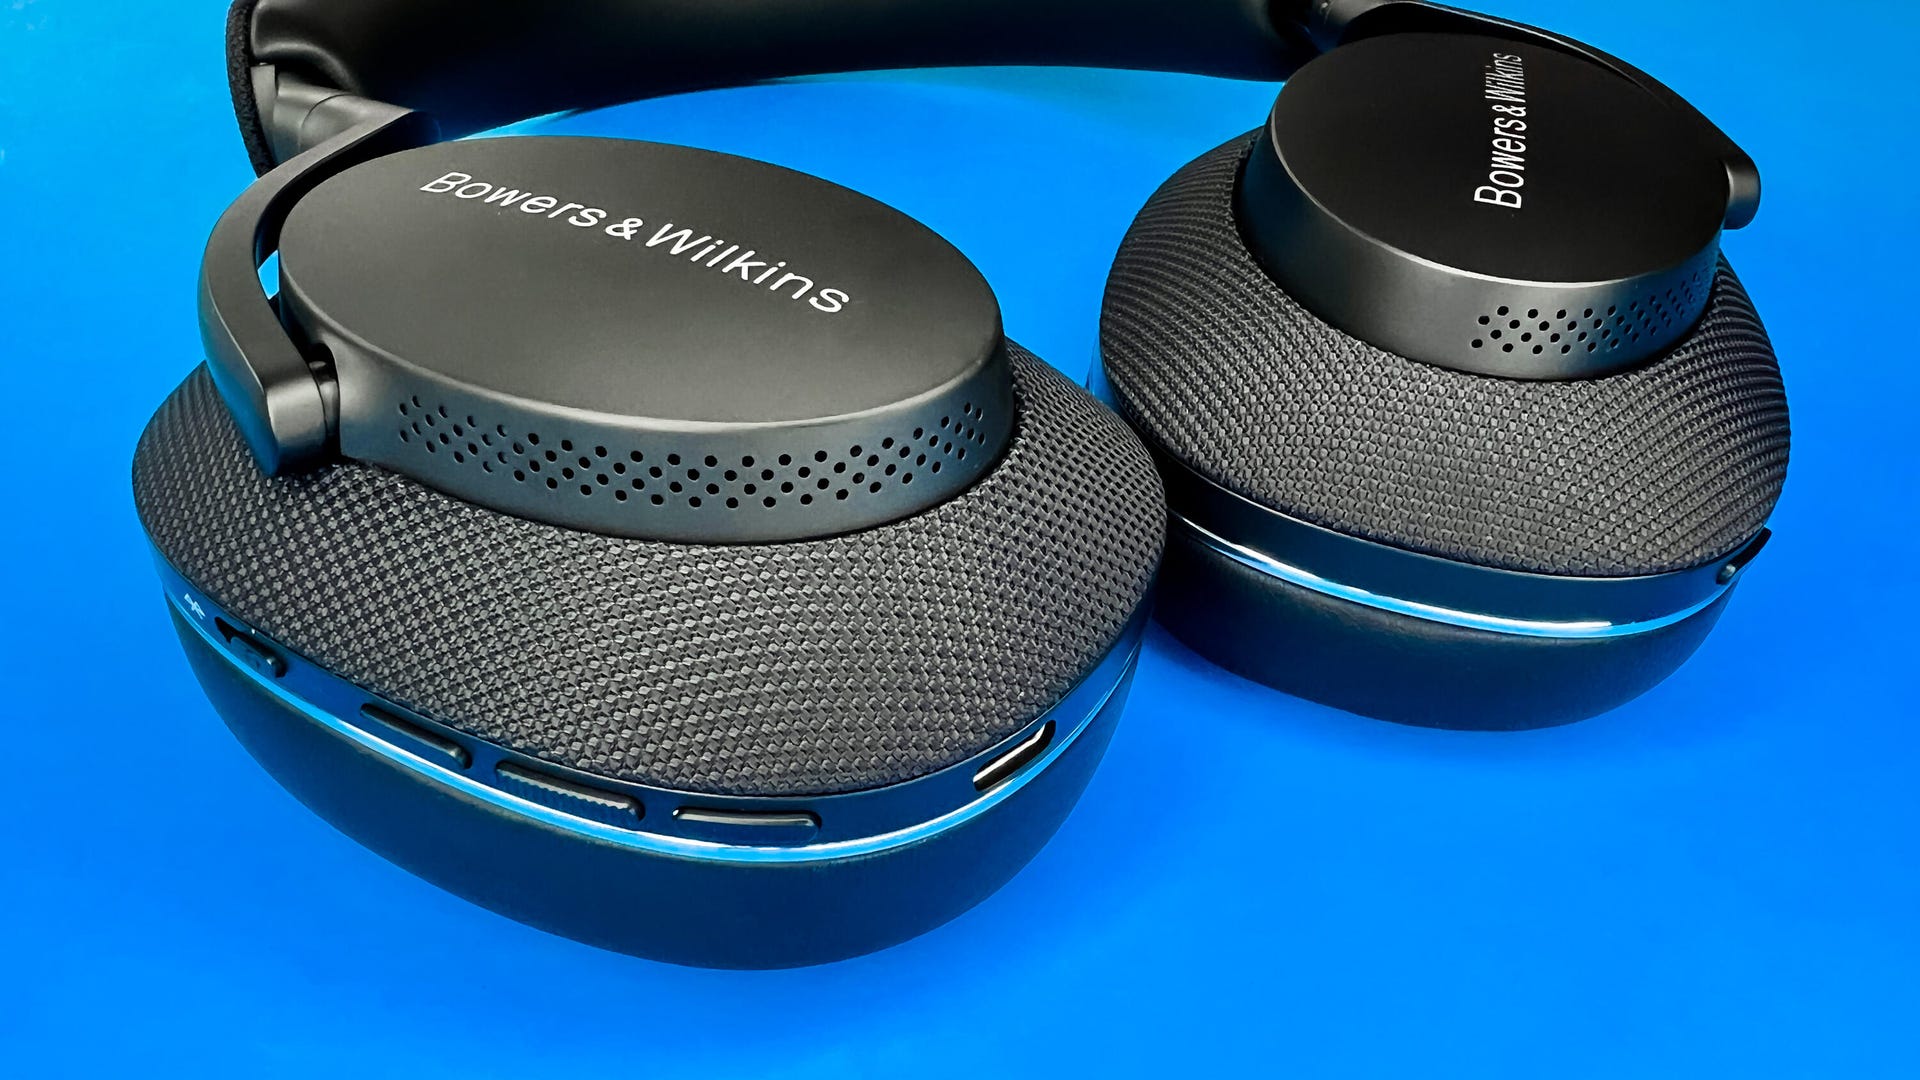 The Bowers & Wilkins PX7 S2 headphones' control buttons